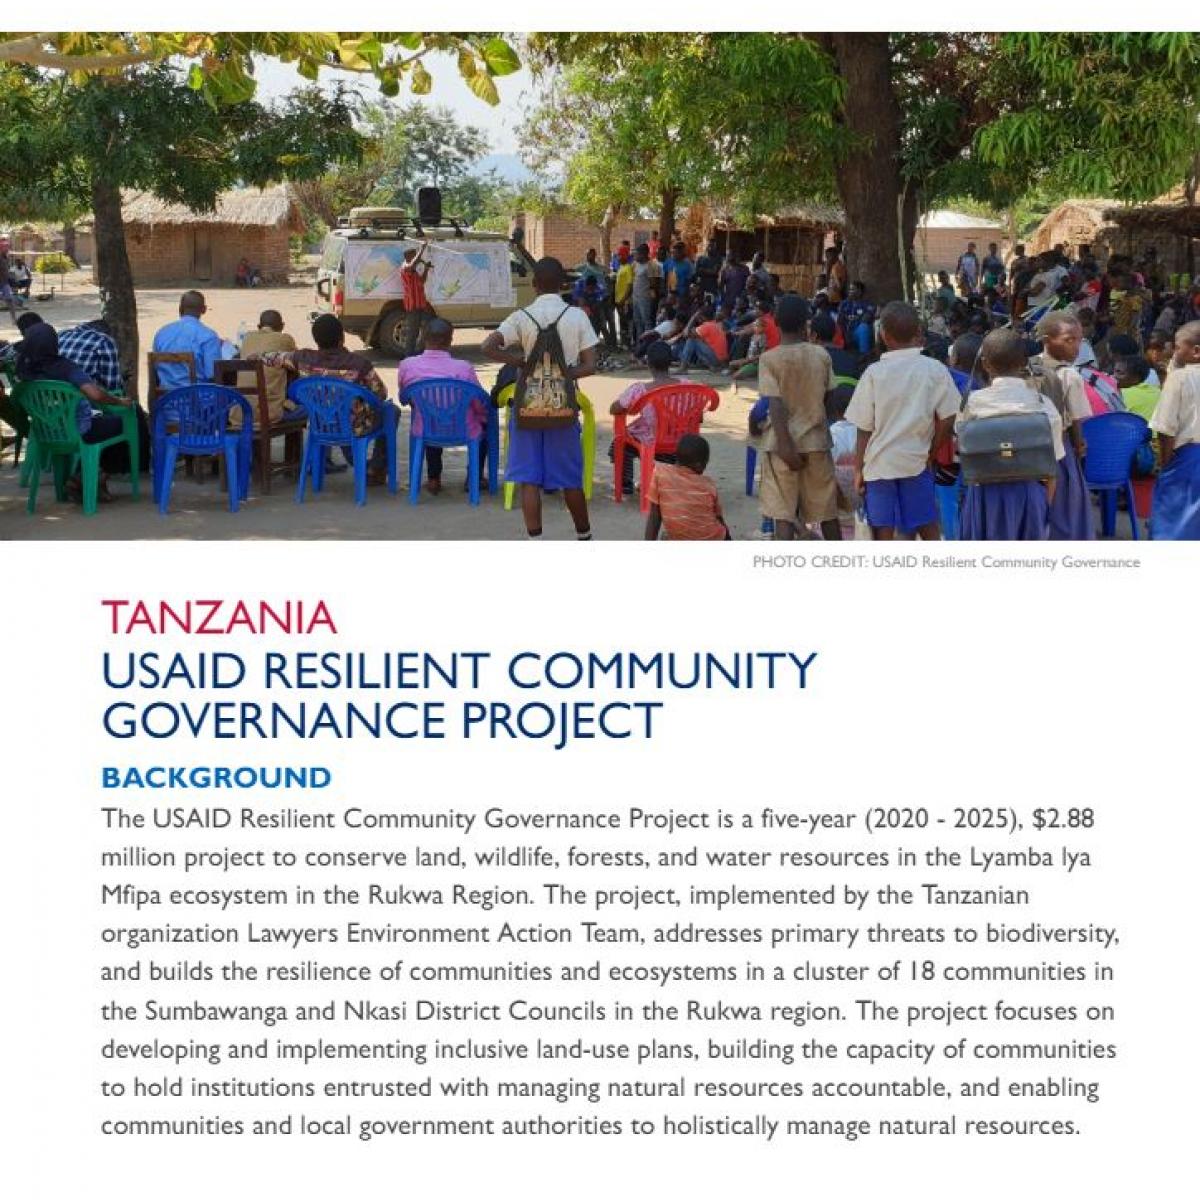 USAID Resilient Community Governance